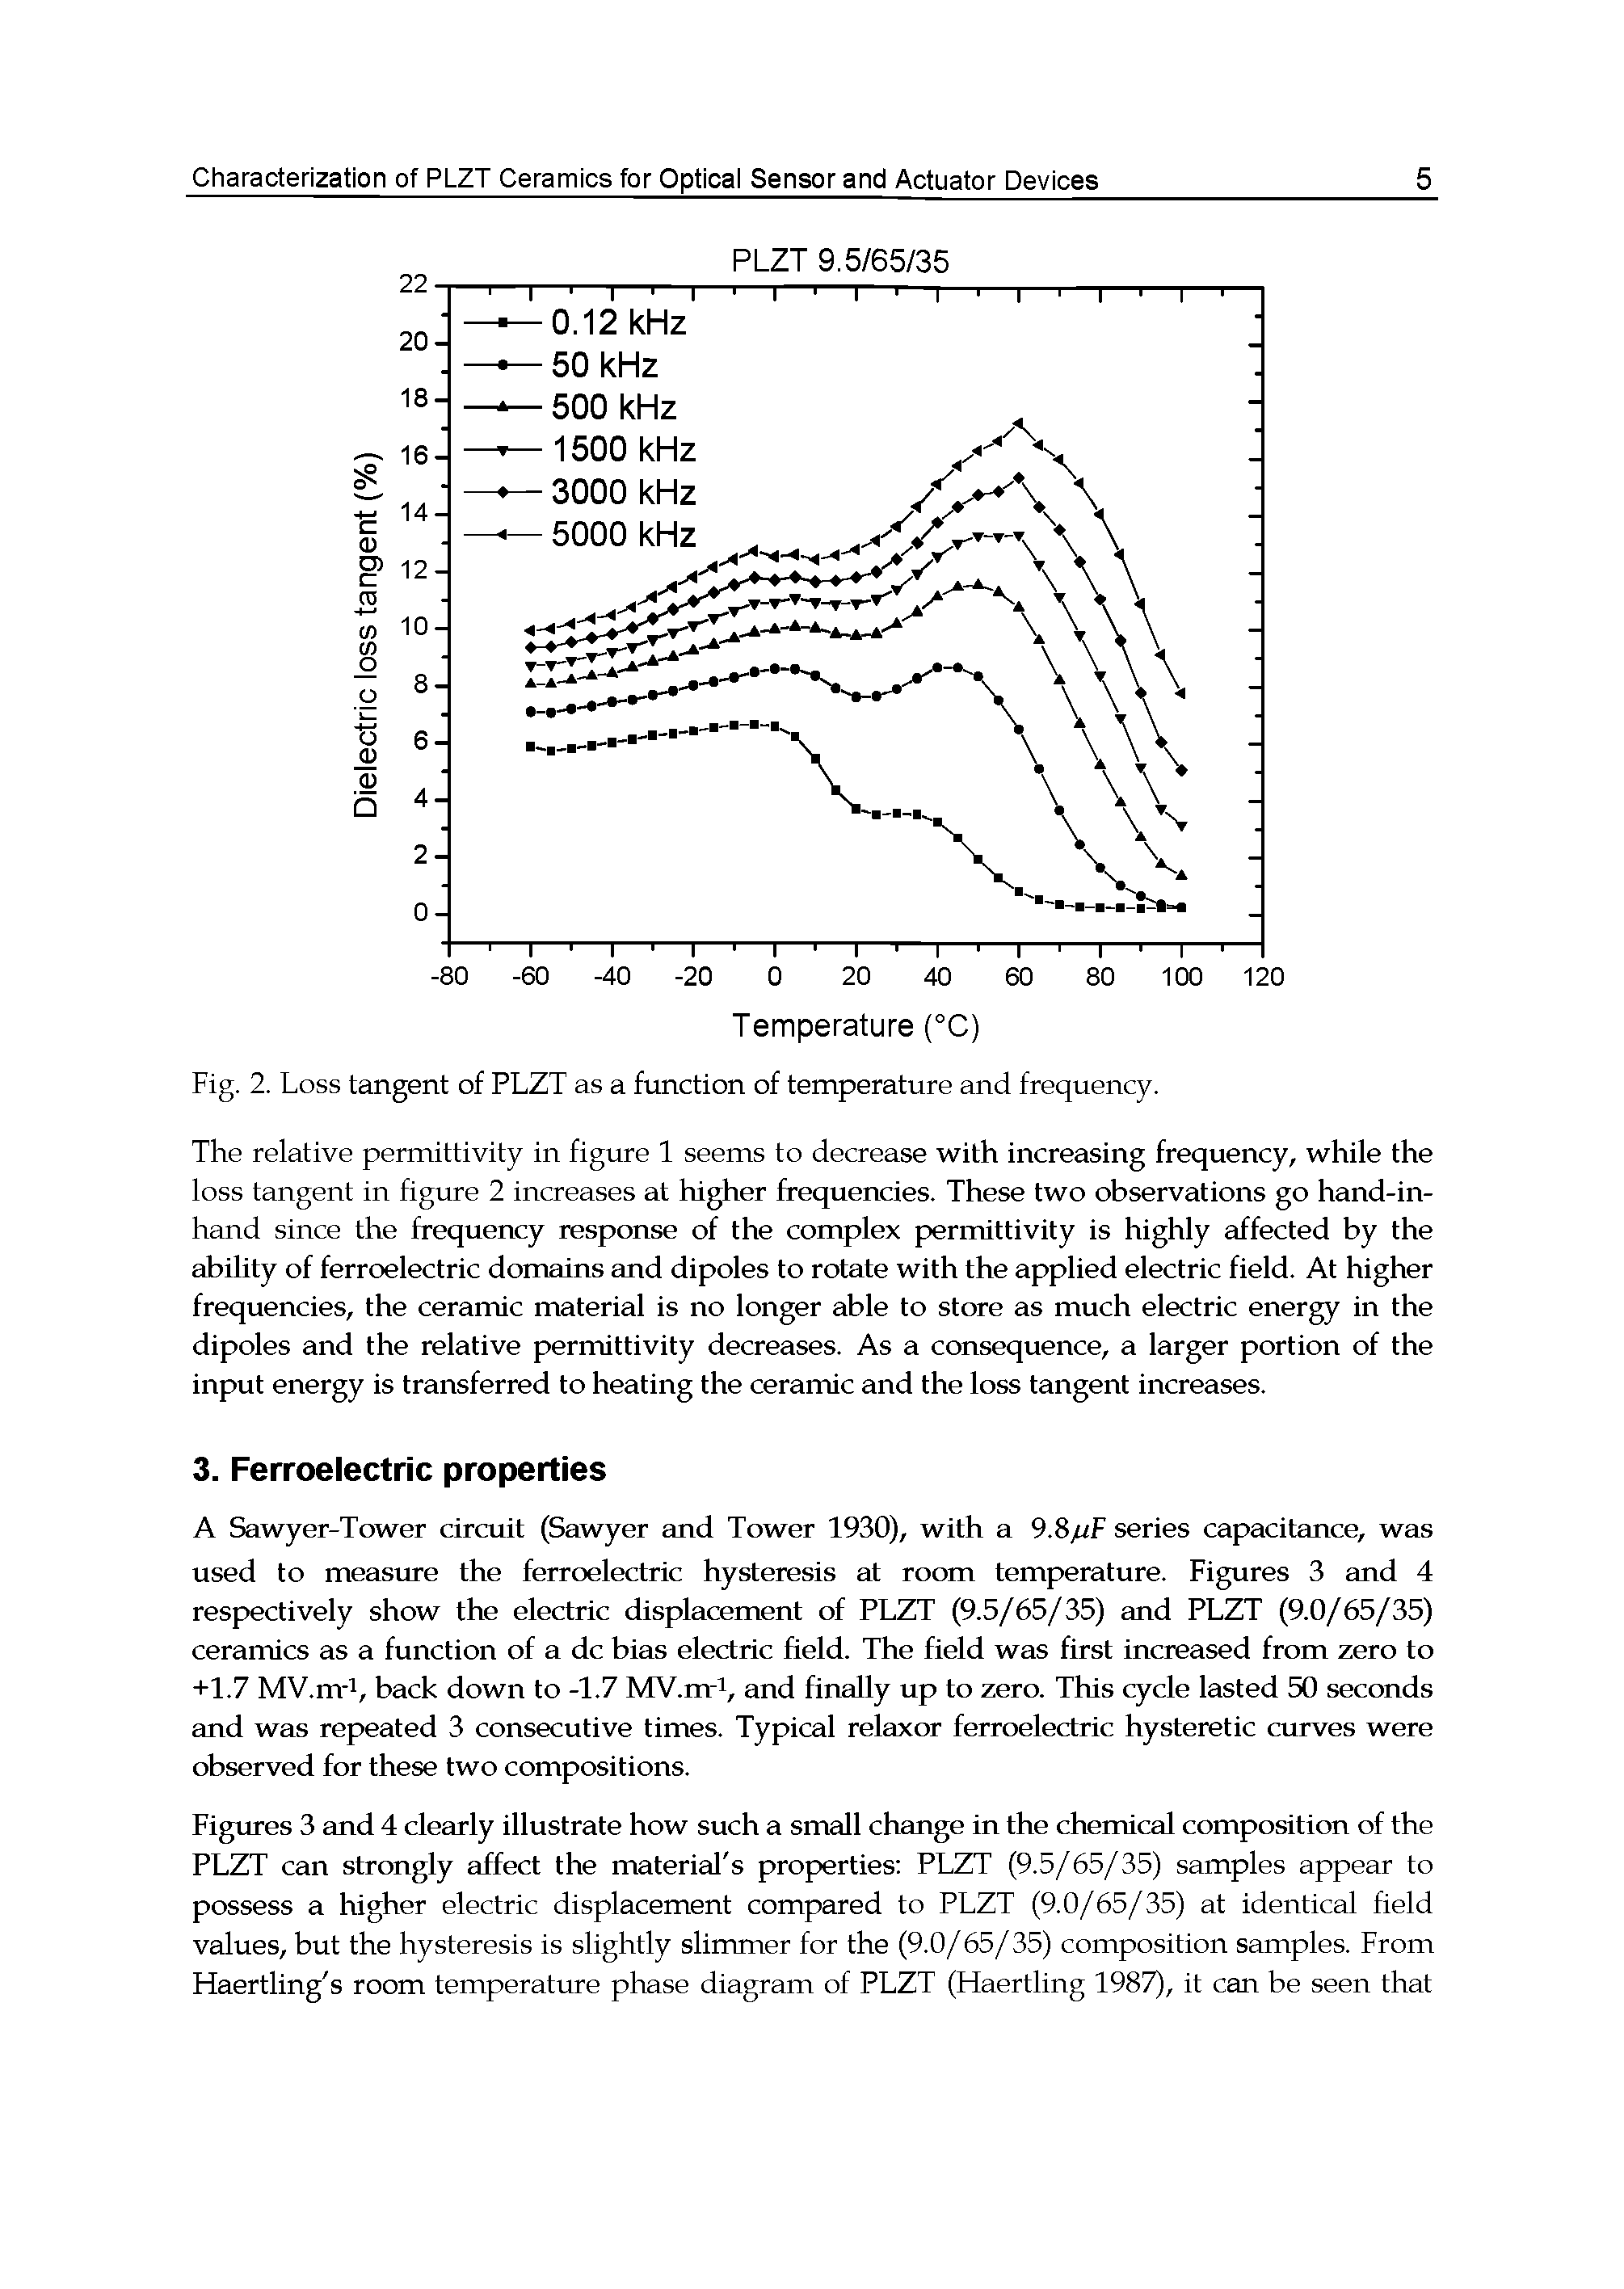 Figures 3 and 4 clearly illustrate how such a small change in the chemical composition of the PLZT can strongly affect the material s properties PLZT (9.5/65/35) samples appear to possess a higher electric displacement compared to PLZT (9.0/65/35) at identical field values, but the hysteresis is slightly slimmer for the (9.0/65/35) composition samples. From Haertling s room temperature phase diagram of PLZT (Haertling 1987), it can be seen that...